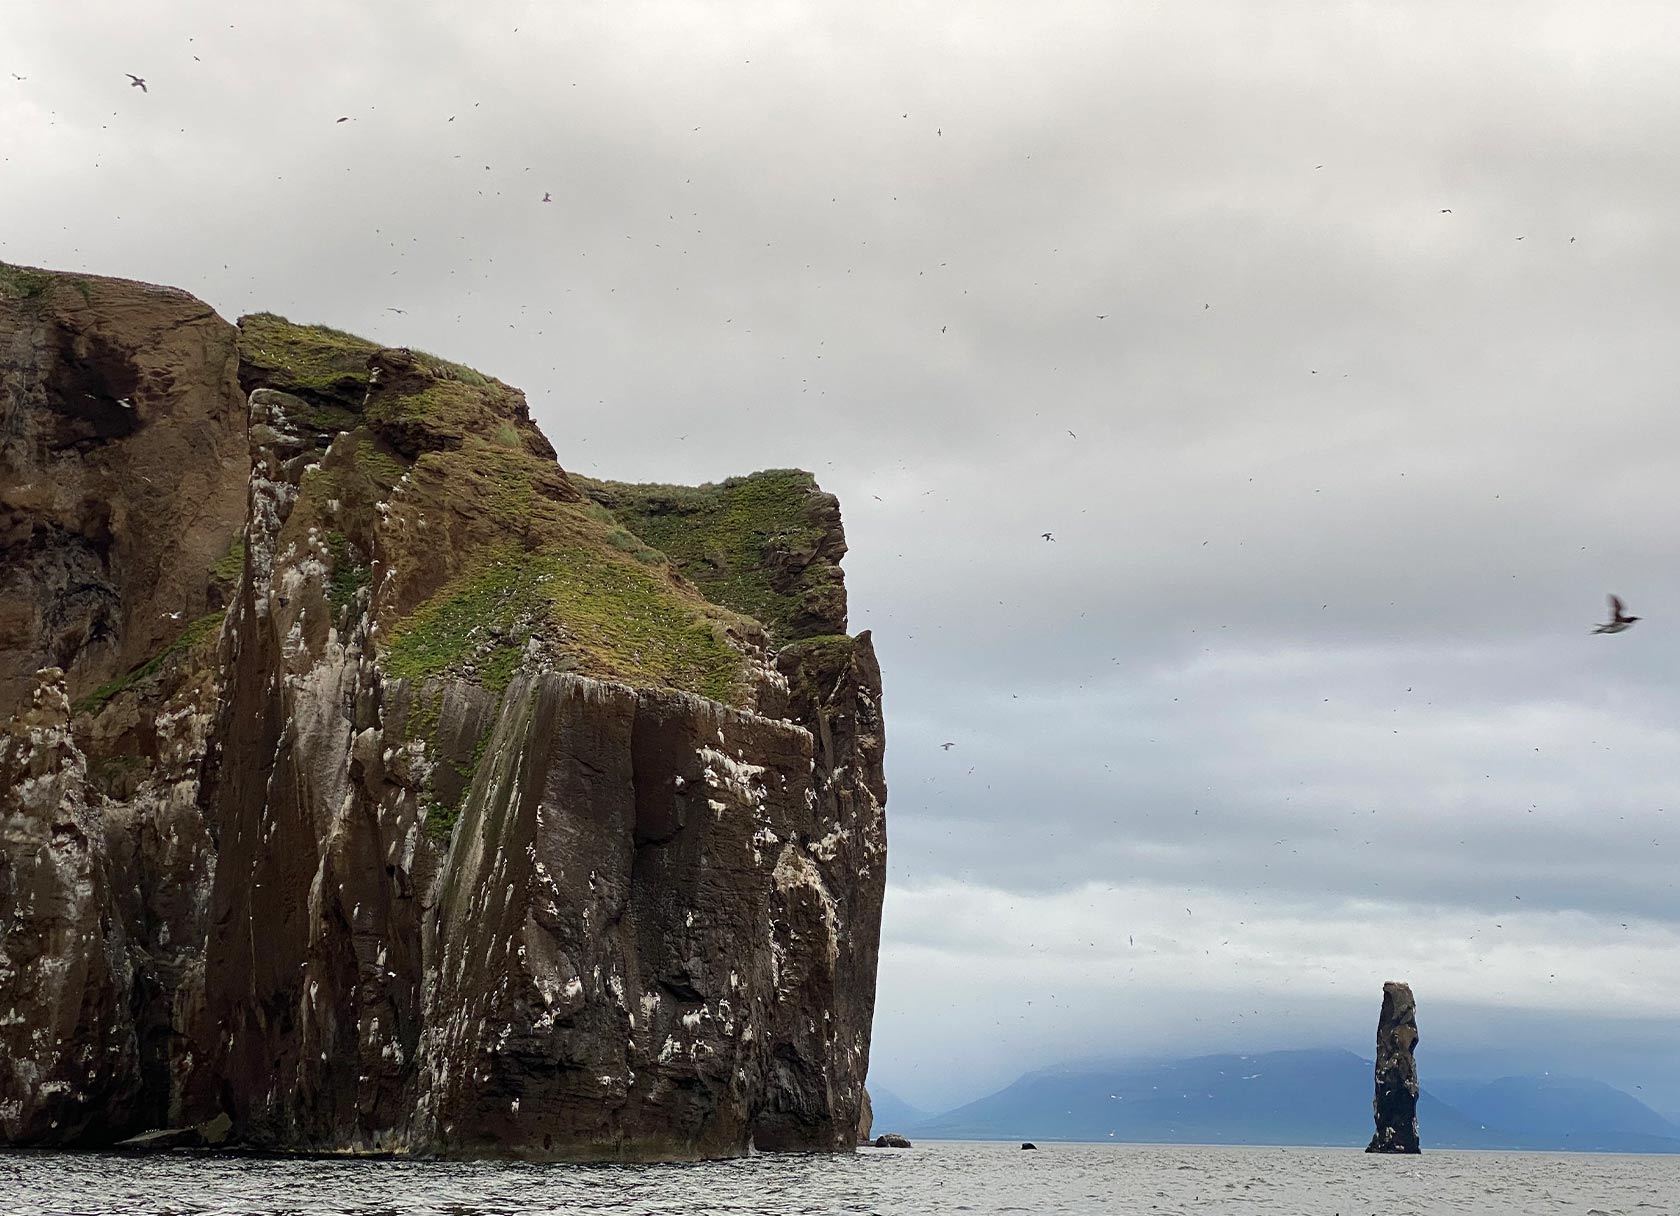 A Guide to Seeing Puffins in Iceland from Brian O'Keefe